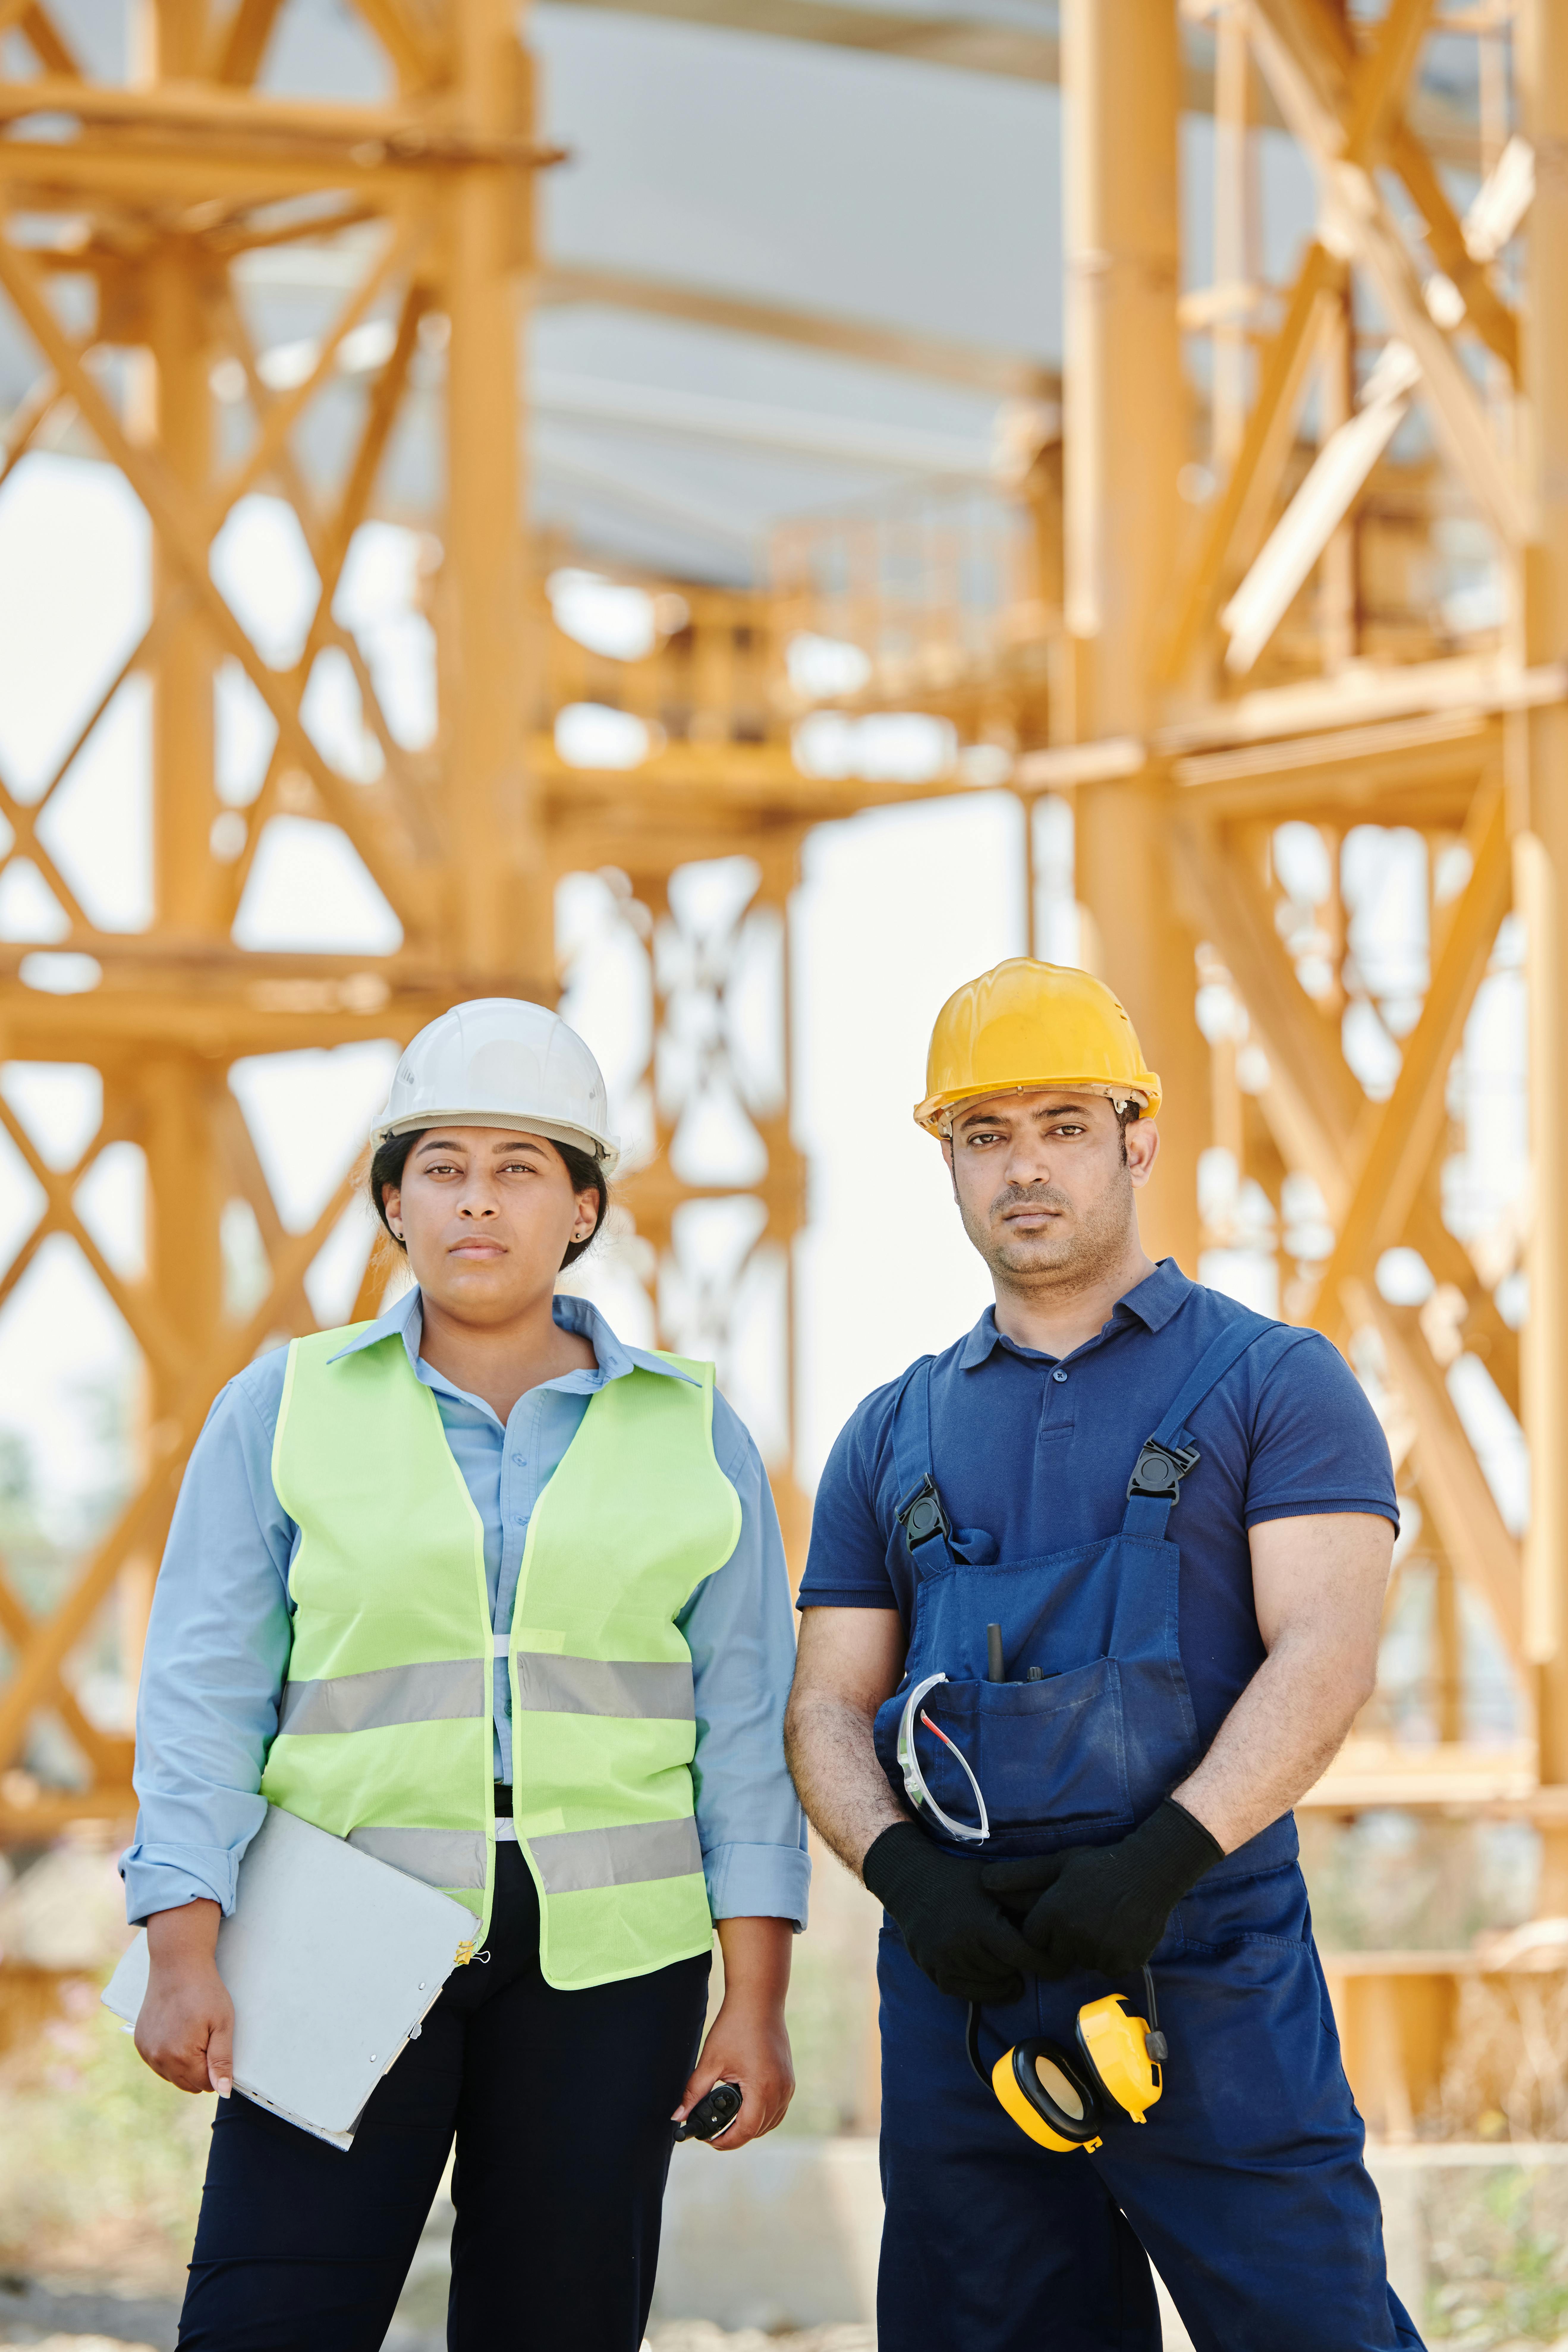 a man and a woman wearing hardhats standing near a metal structure